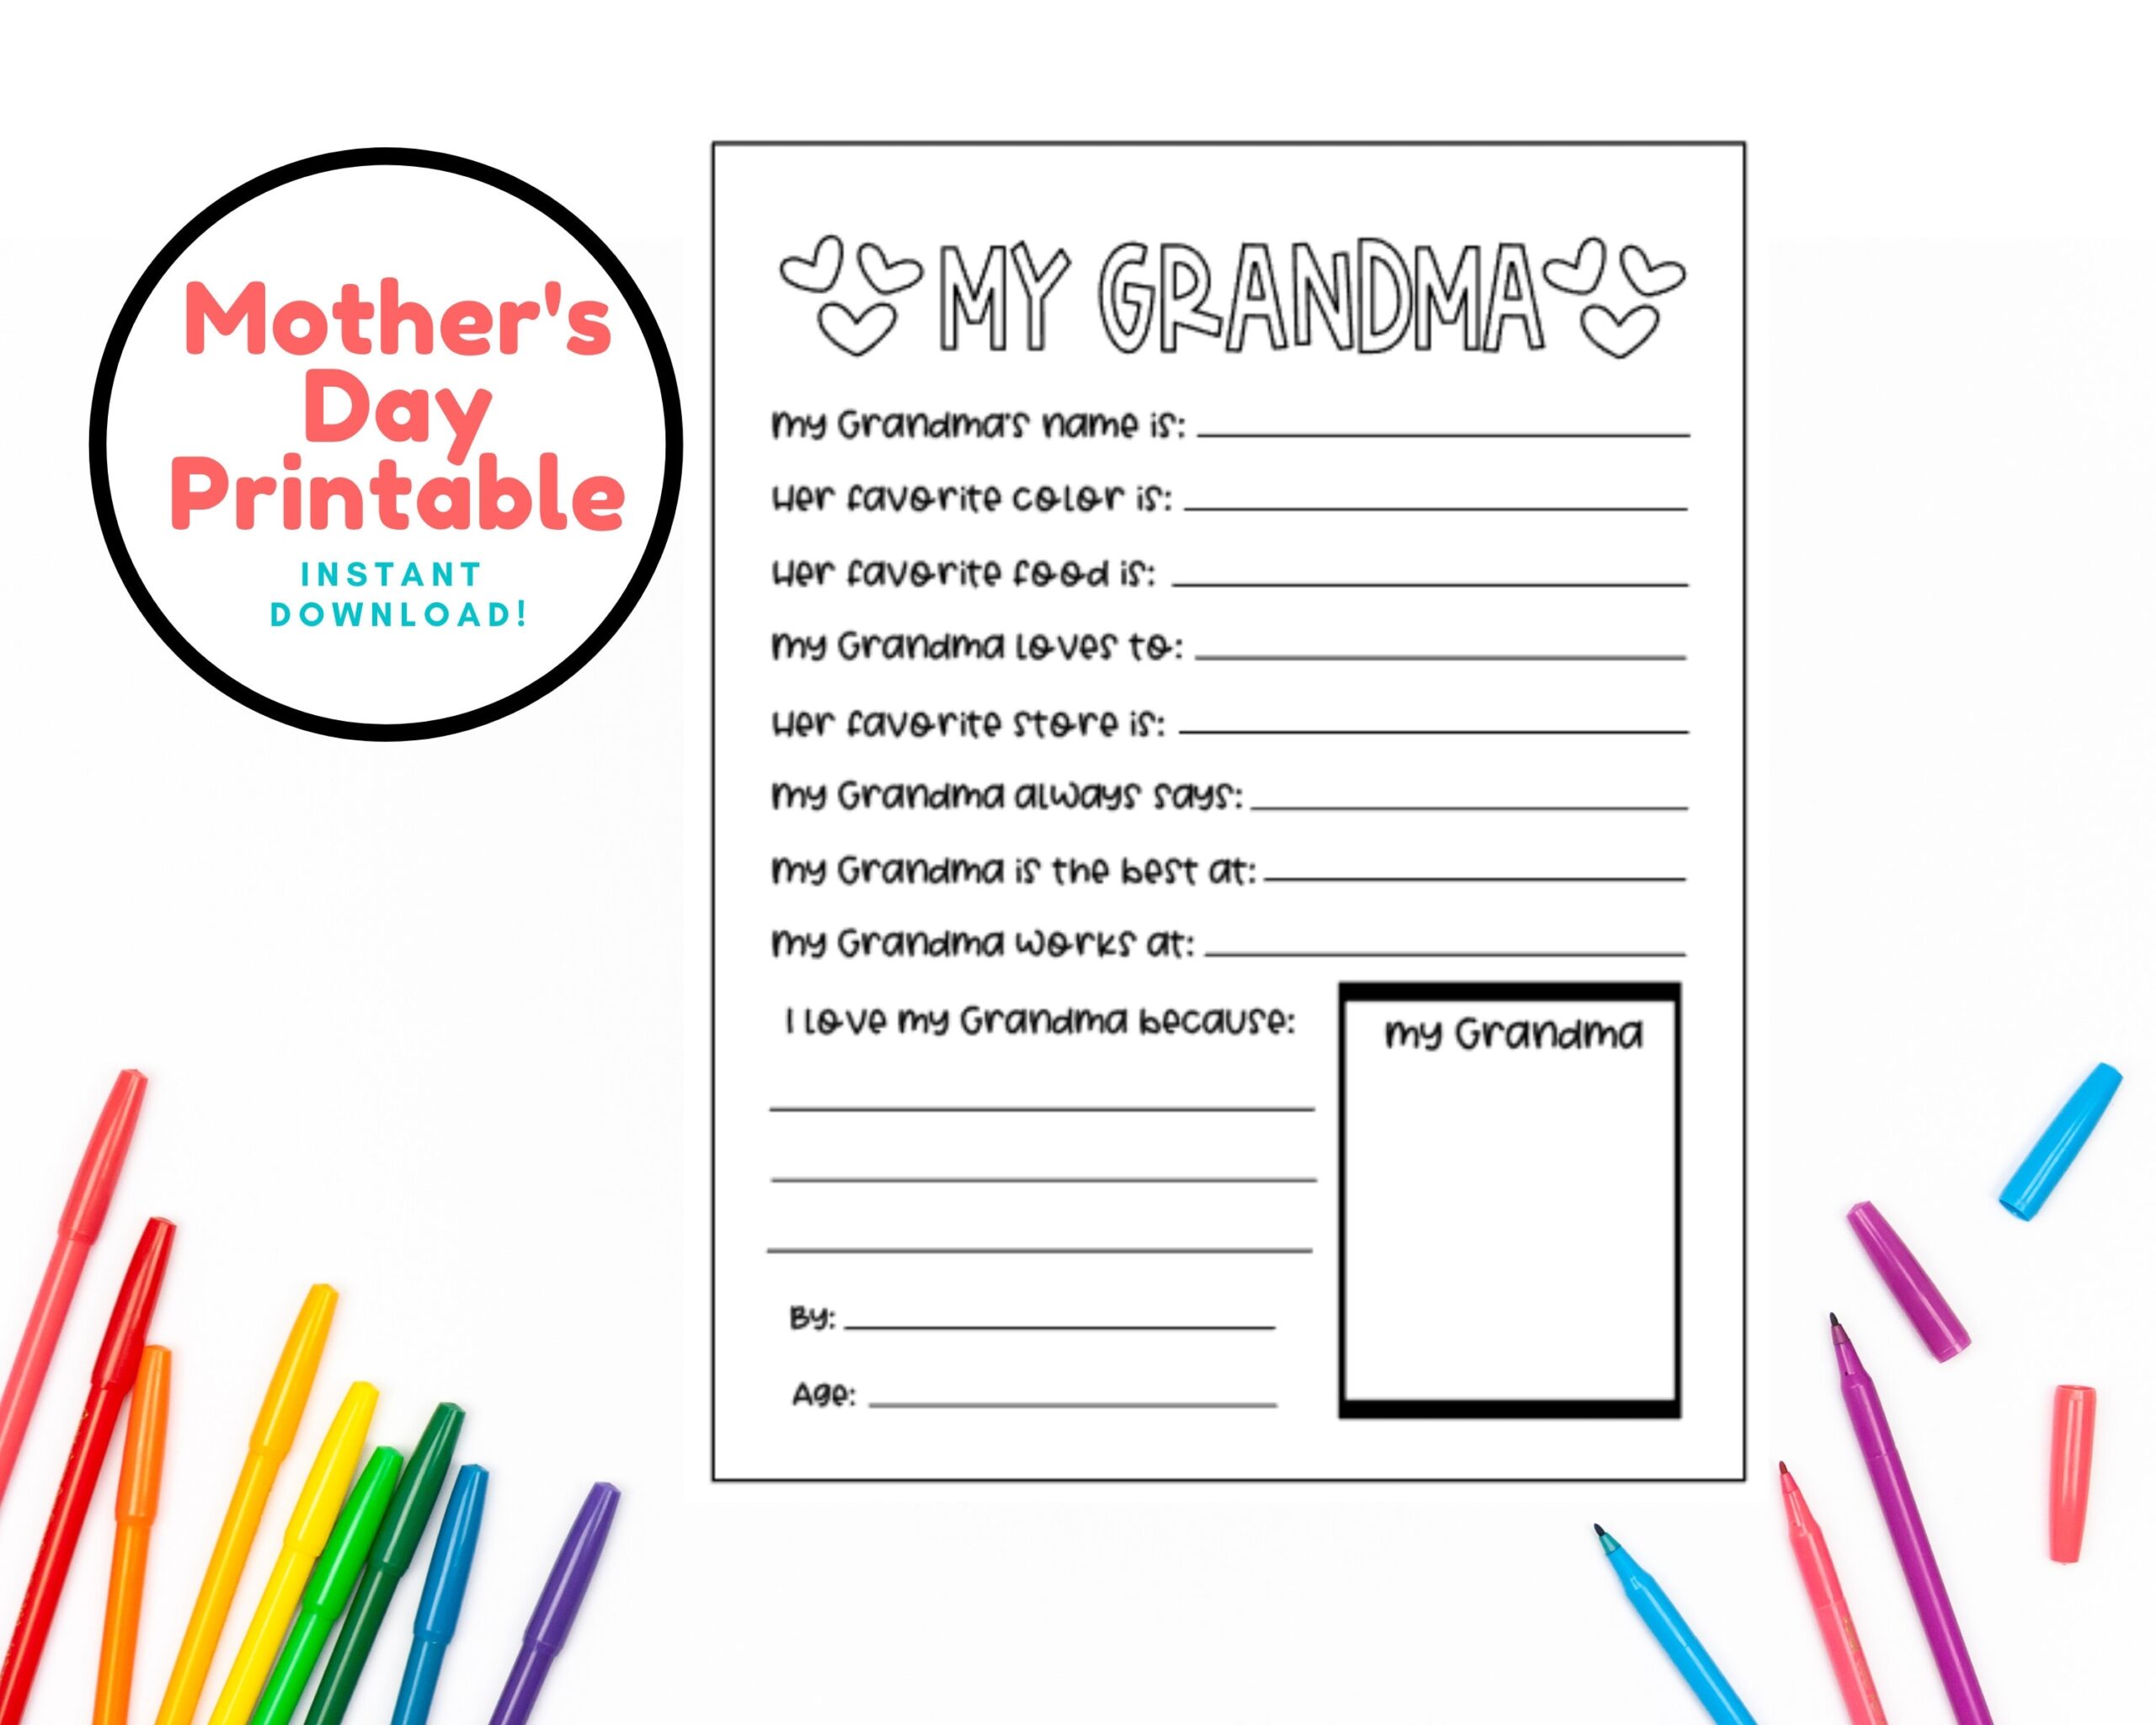 My Grandma Printable For Mother s Day What I Love About My Grandma Custom Printable Etsy